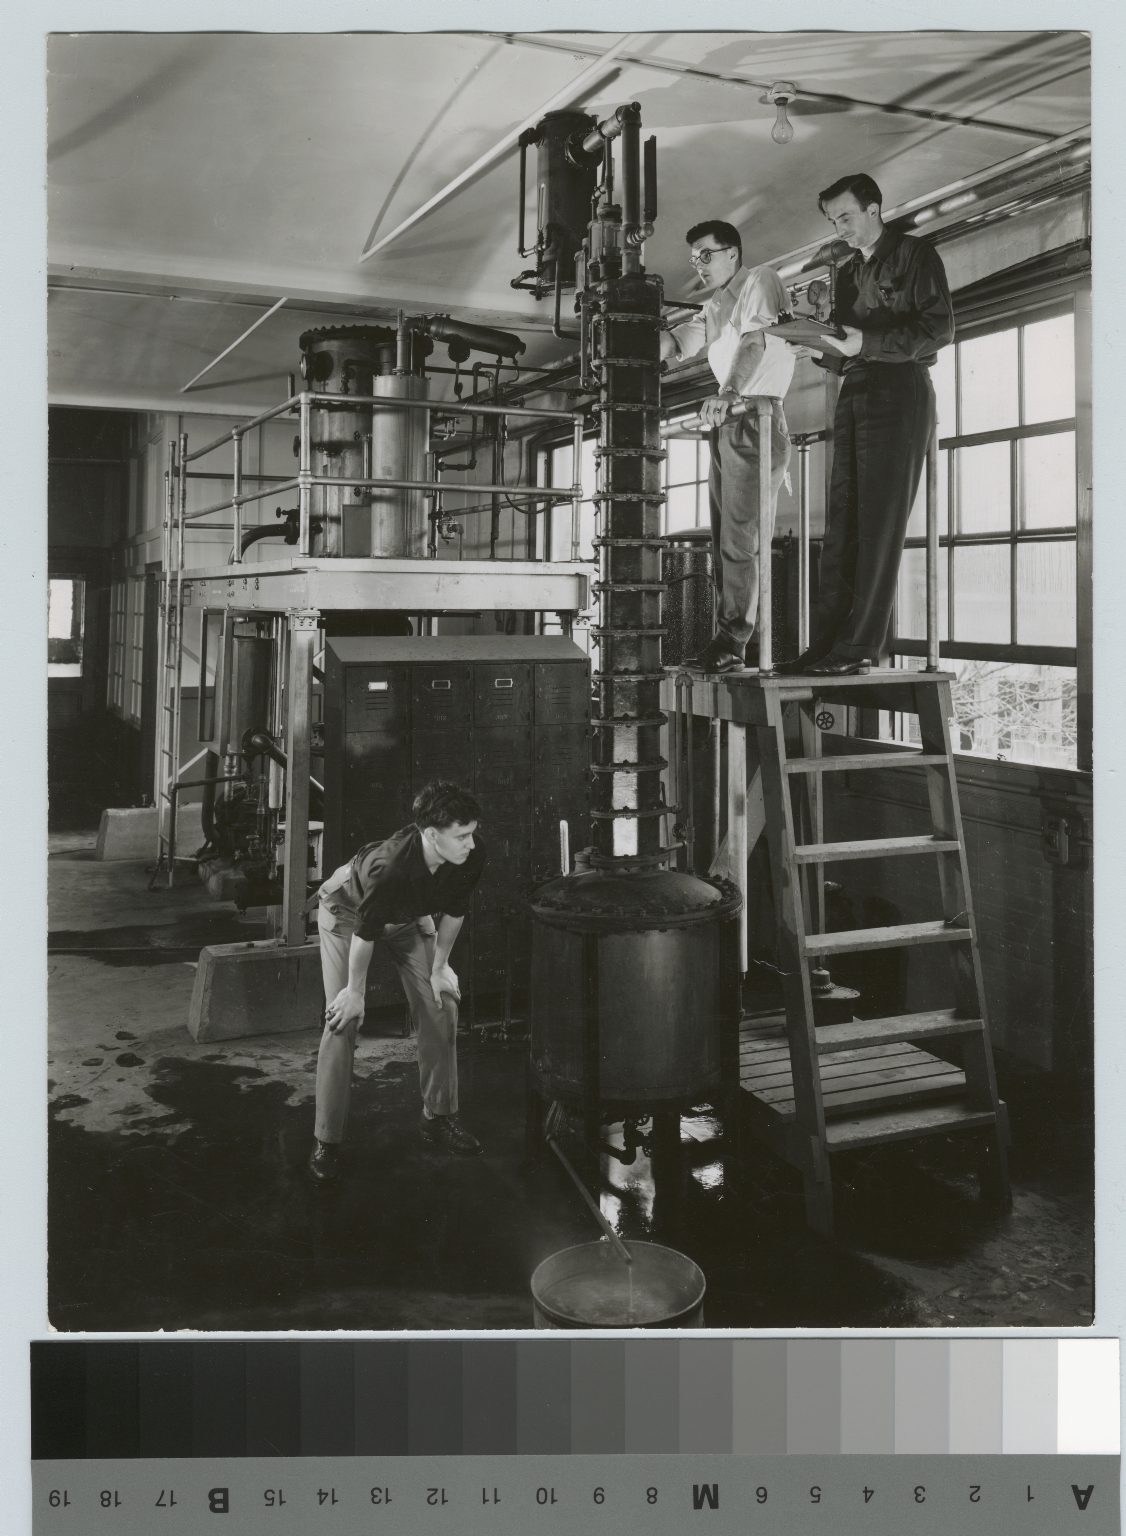 Academics, chemistry, three male Rochester Institute of Technology students working with industrial chemical equipment, [1945-1960]